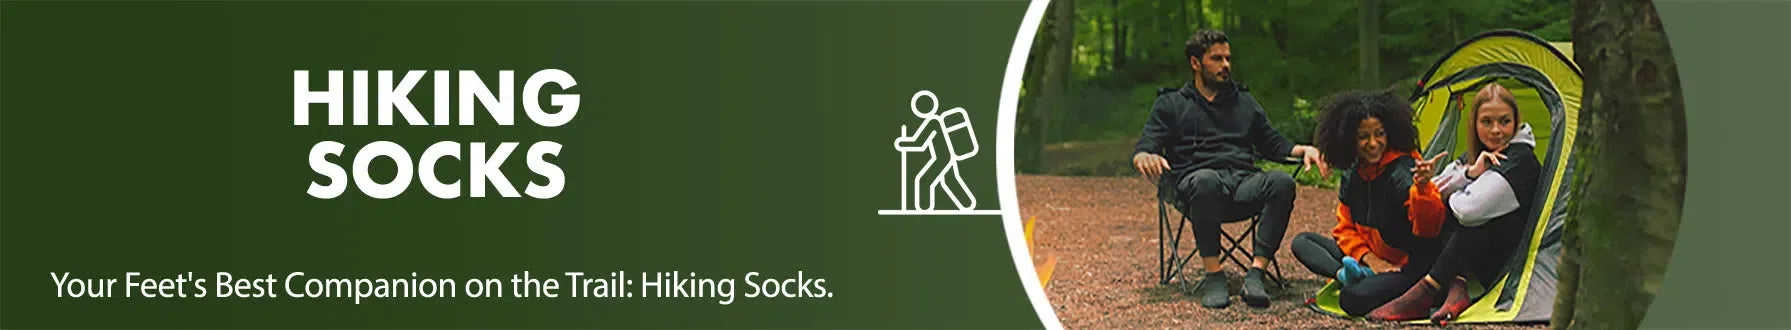 GoWith hiking socks collection banner desktop